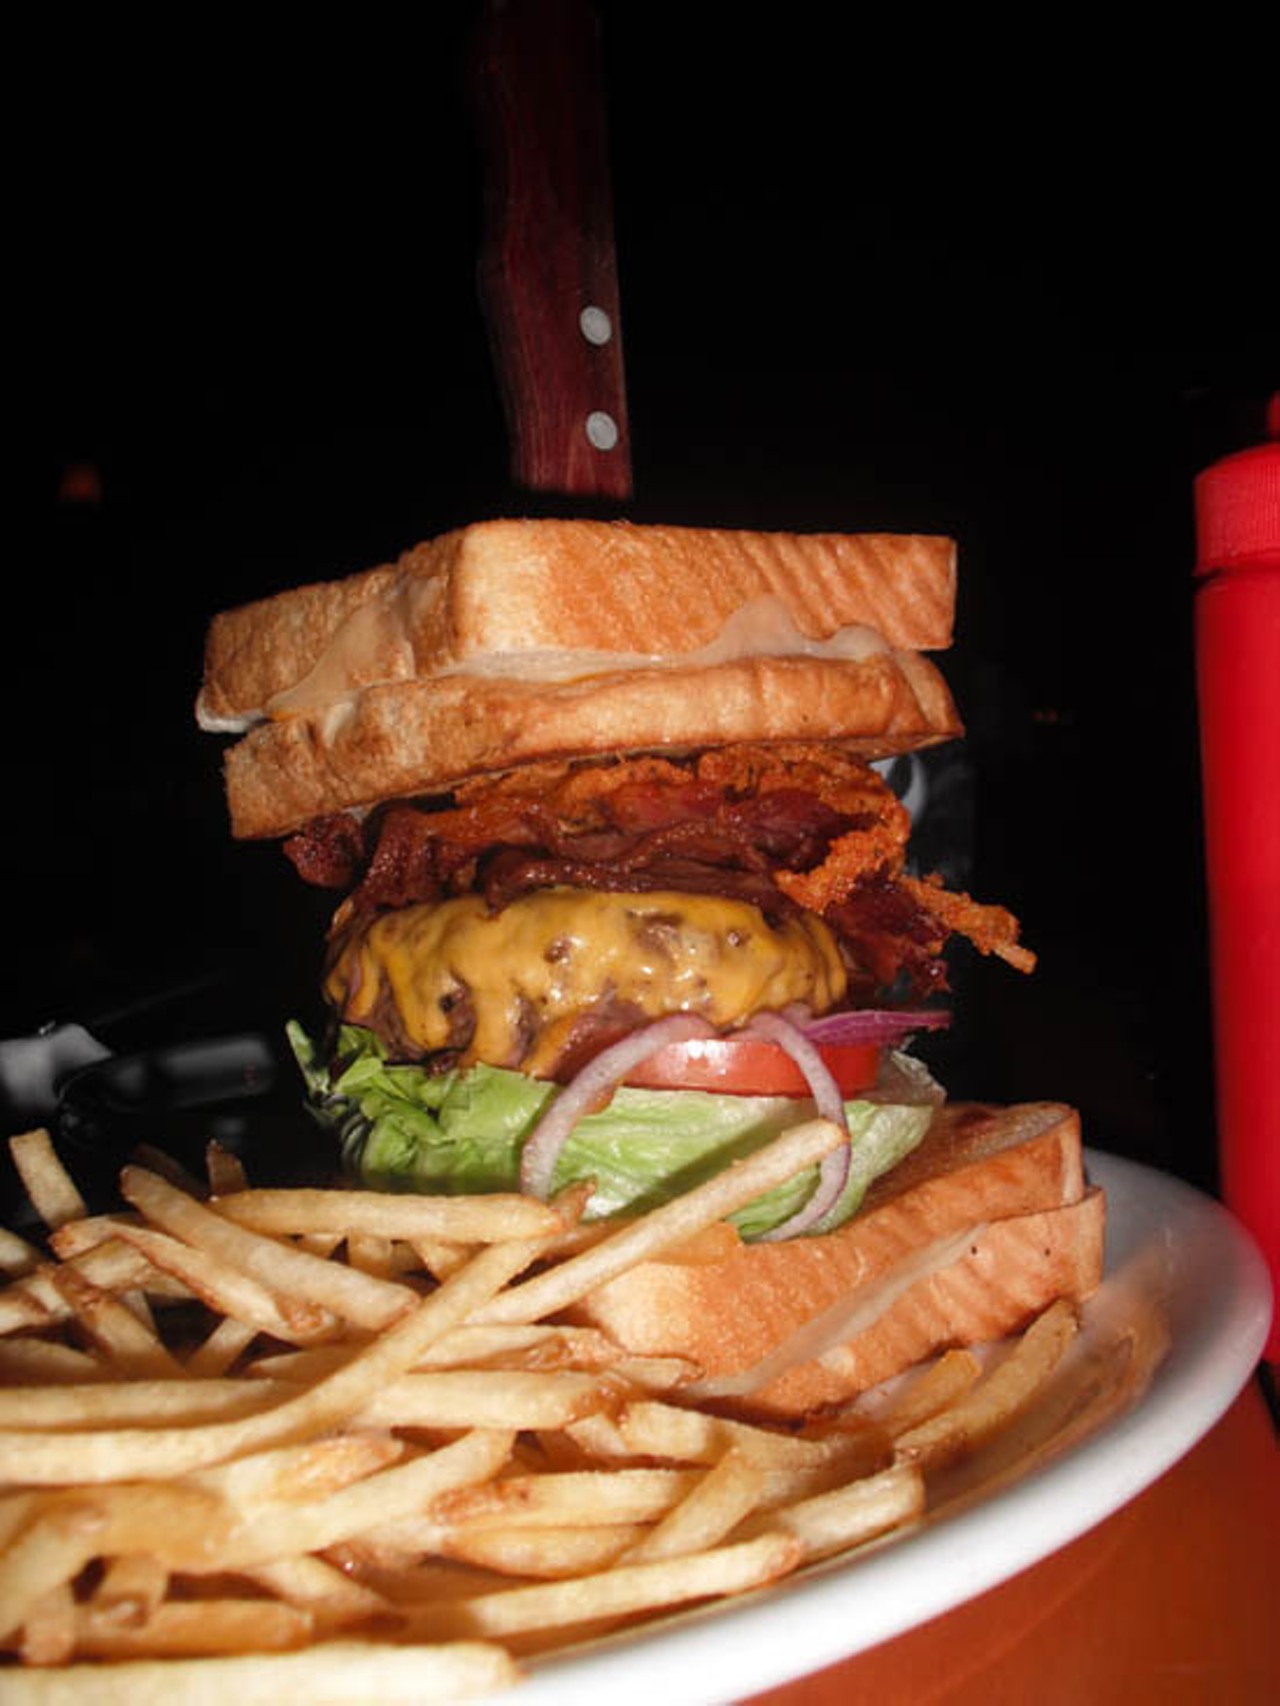 Source: Phoenix
Where: The Lodge
What's better than a burger? Try a burger sandwiched between two grilled cheese...sandwiches! The Lodge in Scottsdale, Arizona has such a burger and they called it The Sasquatch. Eat this burger and you won't get a free T-shirt or your picture on some sort of wall of fame. No, you'll get the satisfaction that you are a man; a man who is very, very full. 
Read more on Phoenix New Times: Big Ass Burger Battle.